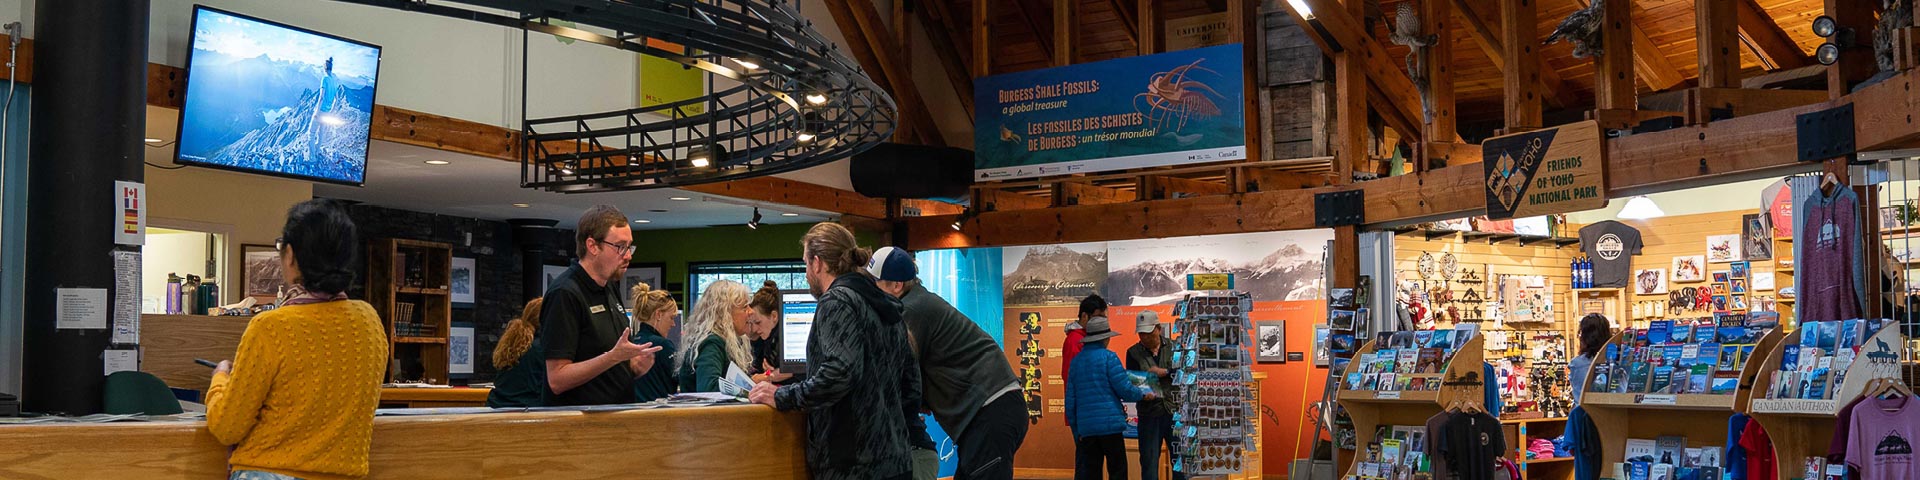 visitors in the yoho national park visitor centre